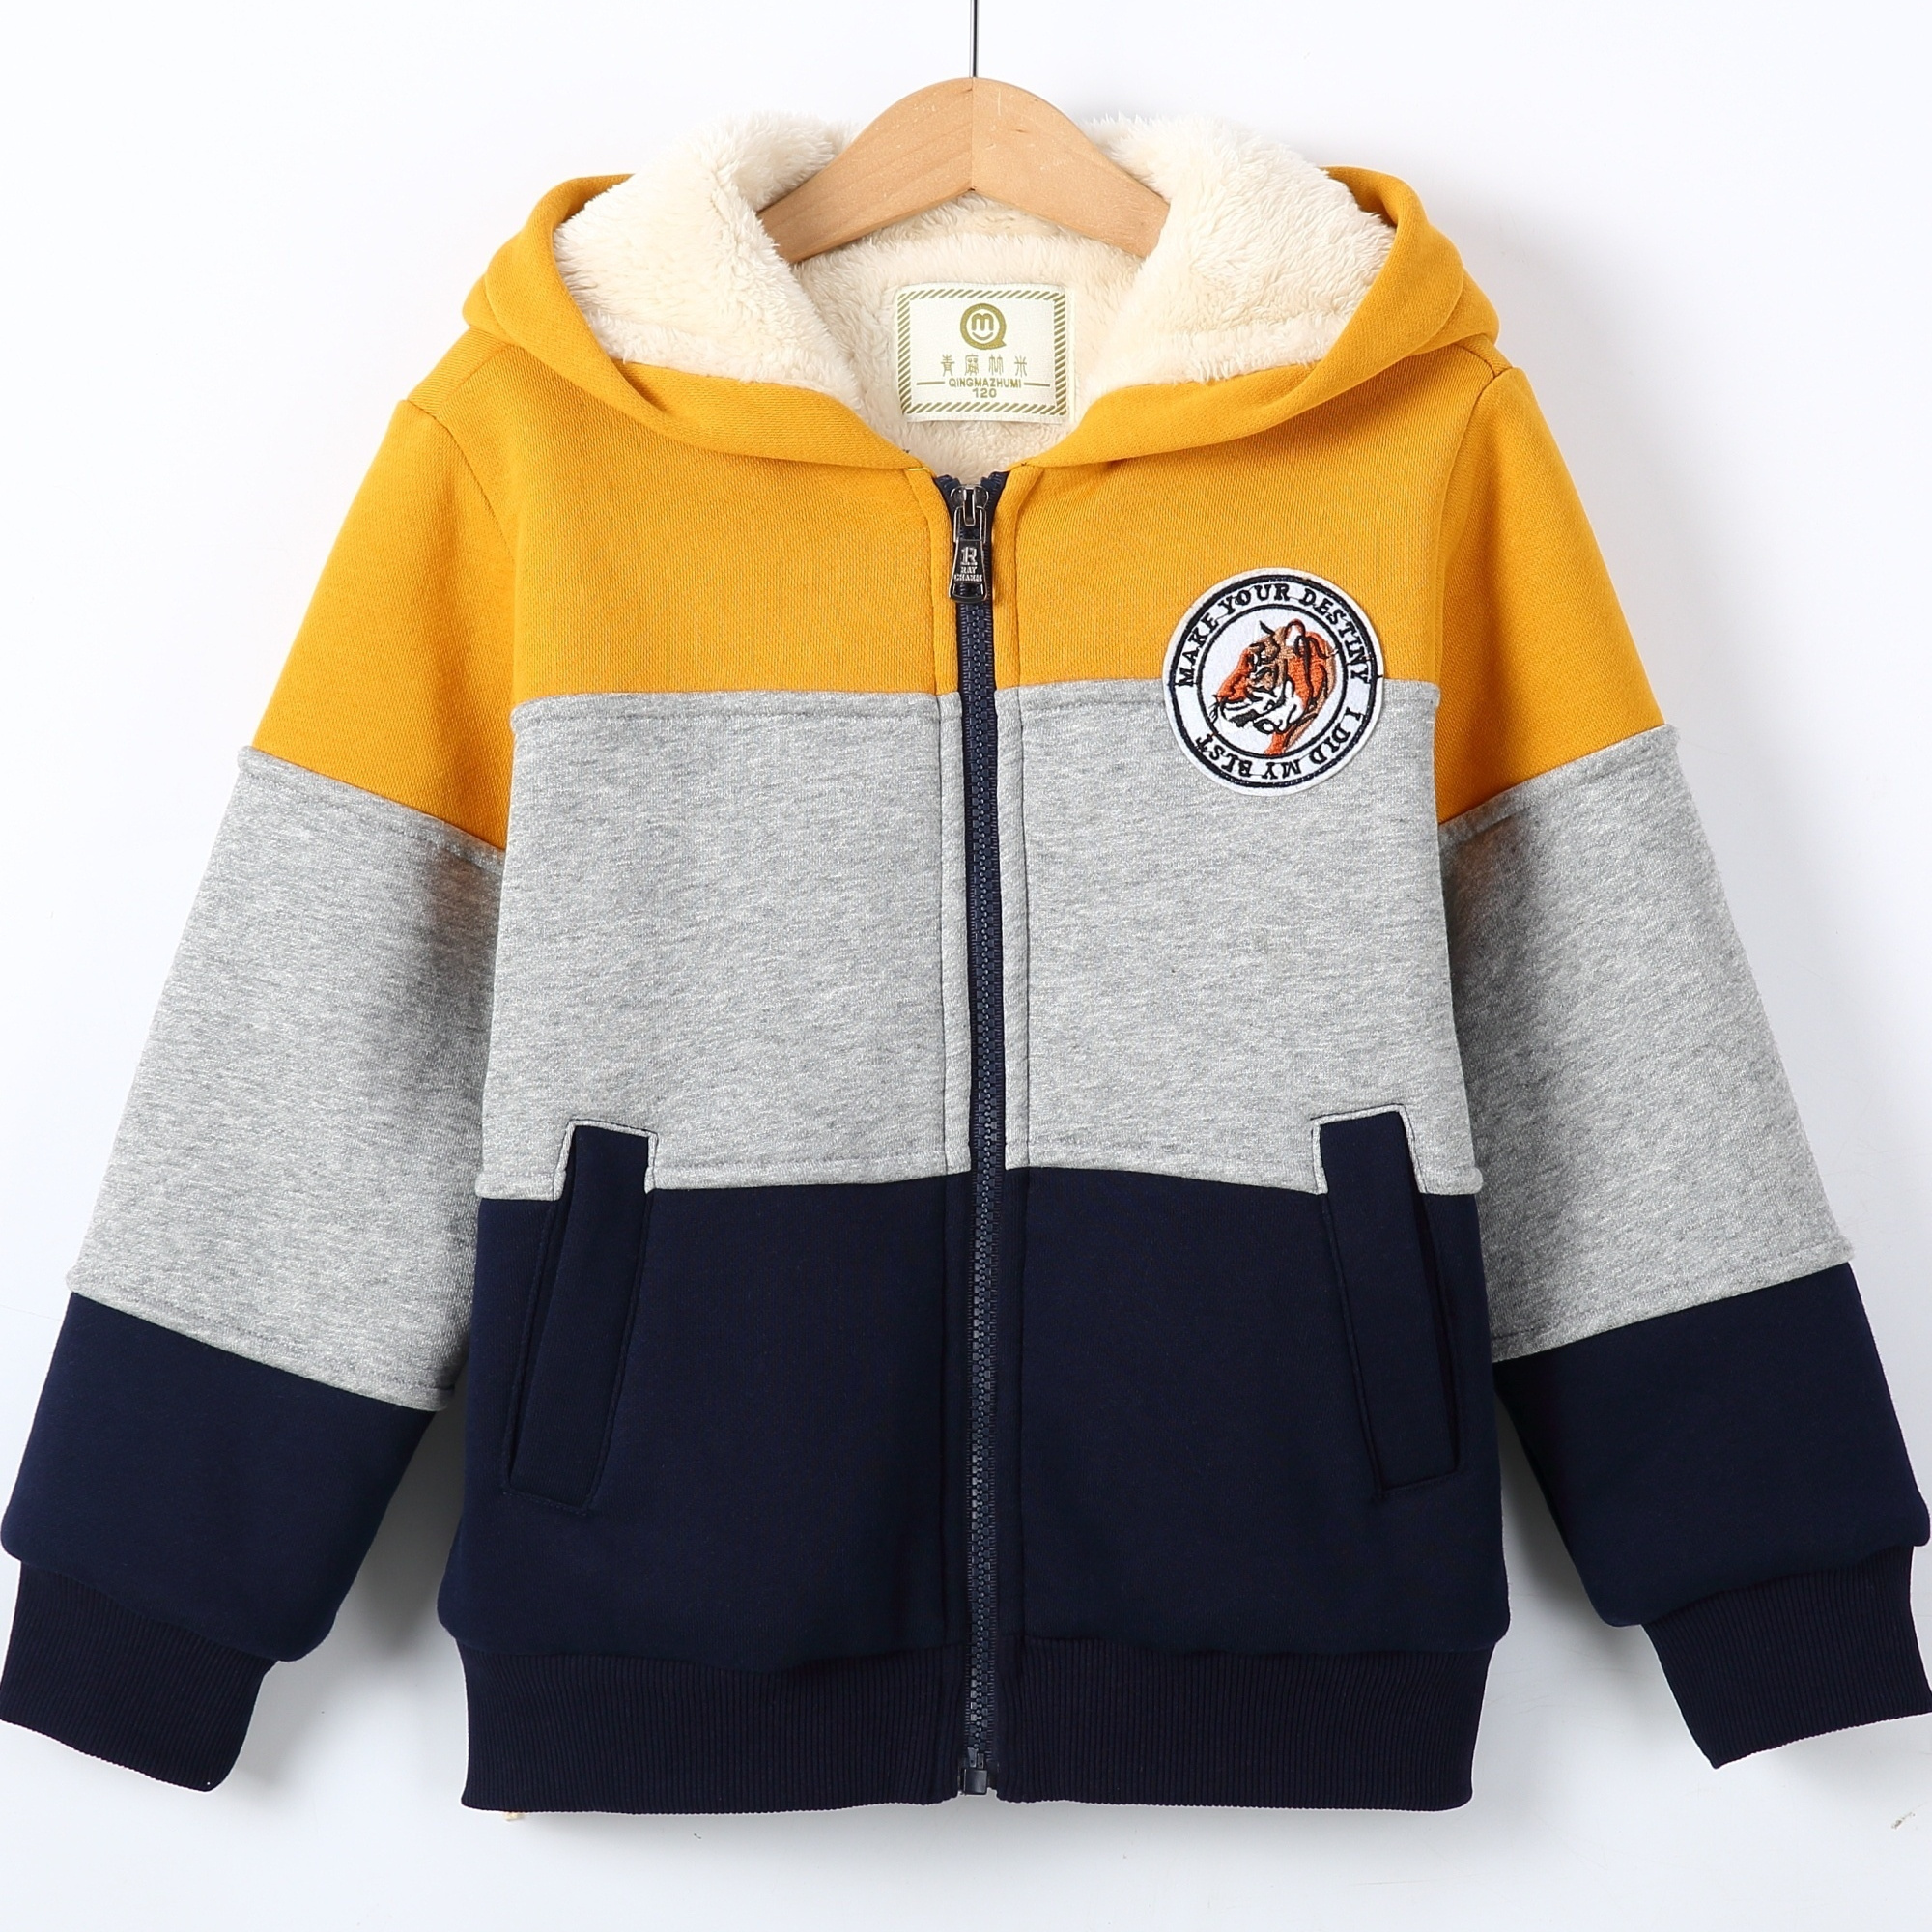 Boys Casual Fleece Thermal Stitching Jacket Long Sleeve Zip Up Outwear ...